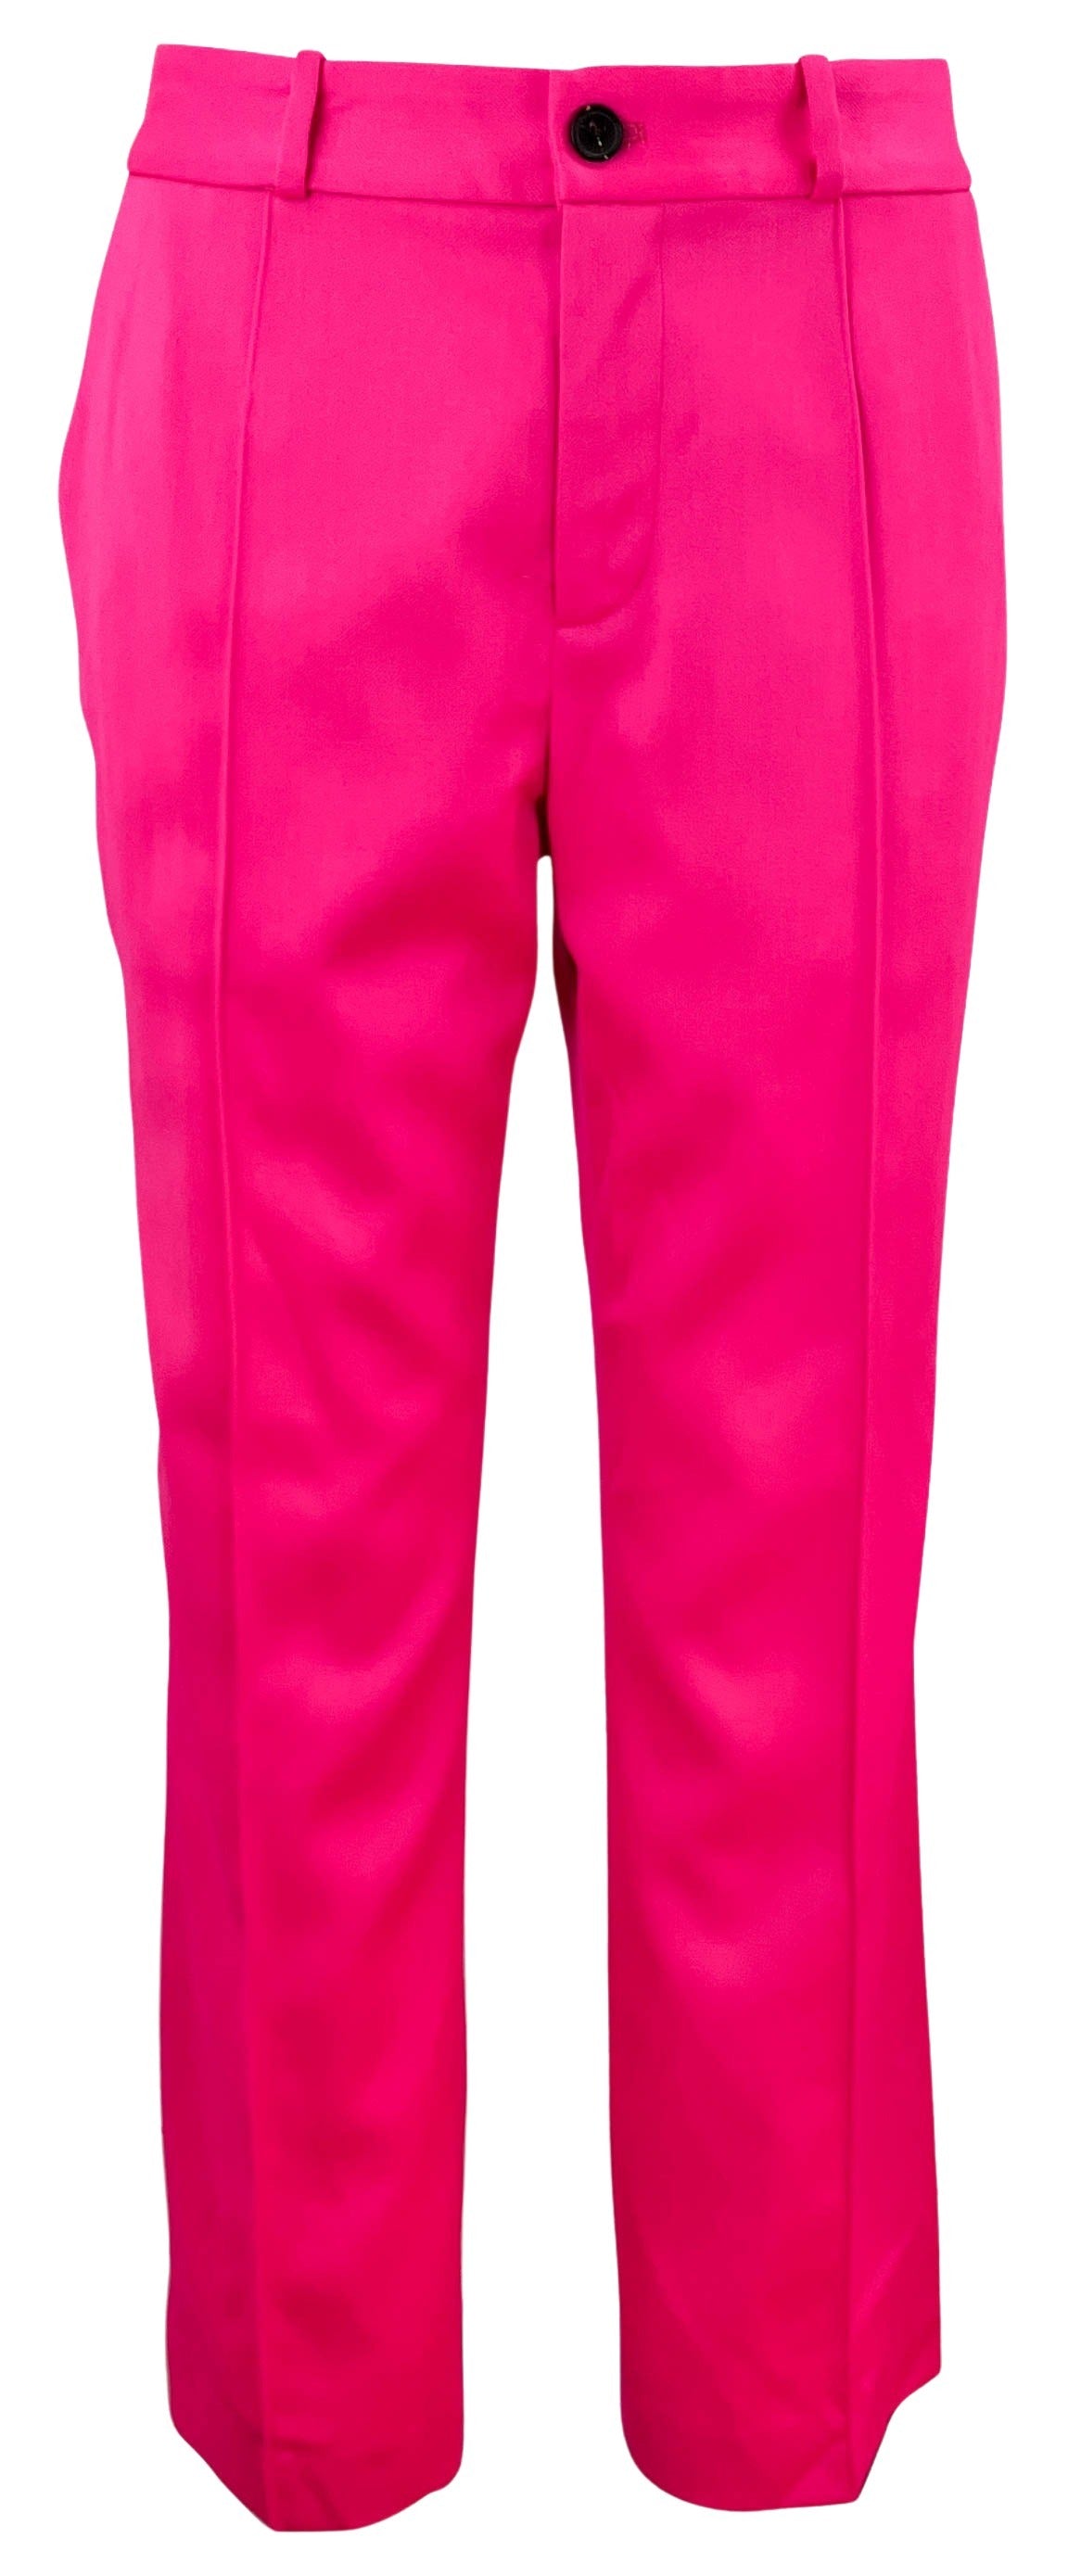 Brandon Maxwell Cropped Wool Trouser in Bright Pink - Discounts on Brandon Maxwell at UAL